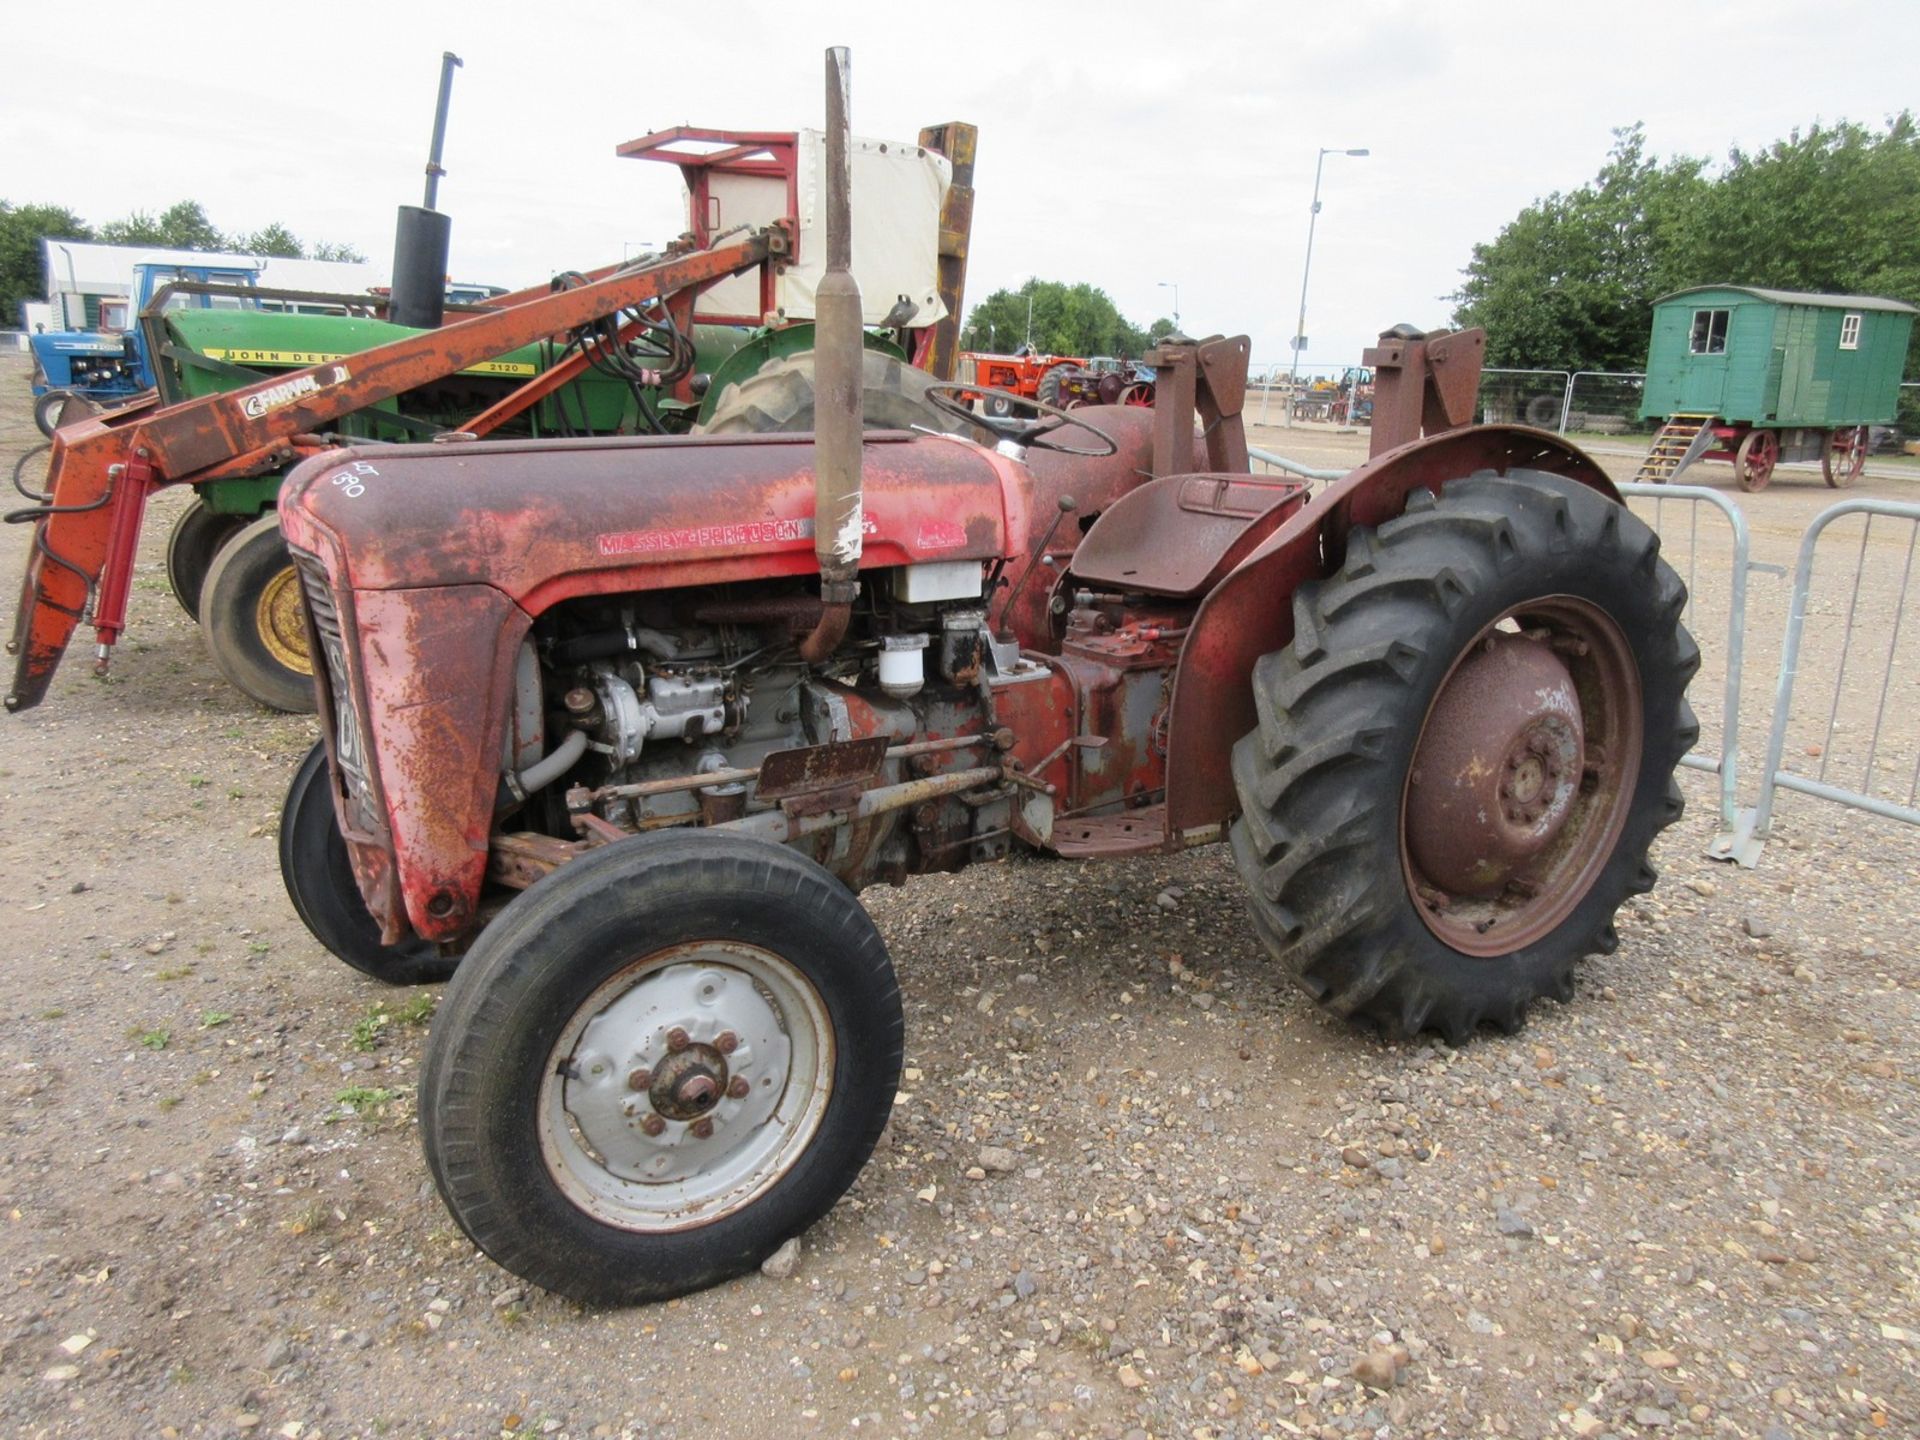 MASSEY FERGUSON 35X 3cylinder diesel TRACTOR Stated by the vendor to be in original condition